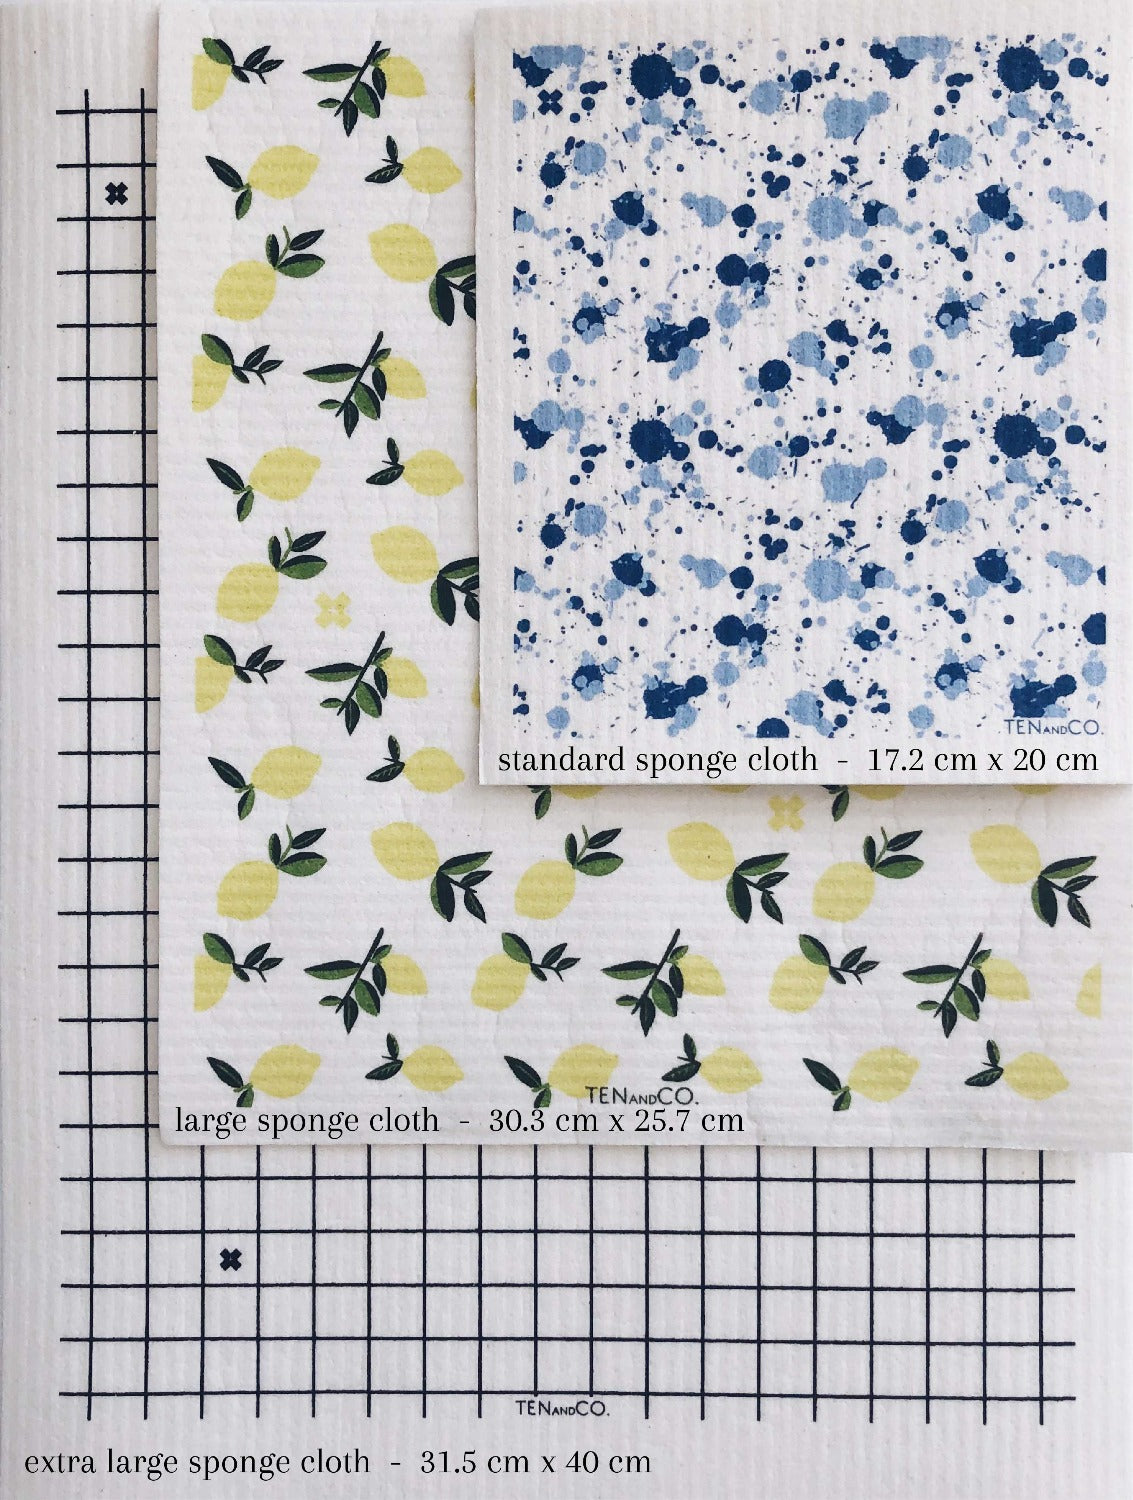 Flay lay image of sponge cloth sizes. There are 3 different sized sponge cloths laying on top of each other. On the bottom is an XL grid sponge cloth. On top of that is a large Citrus Lemon sponge cloth and then on top of that is a standard Splatter Blues sponge cloth. 